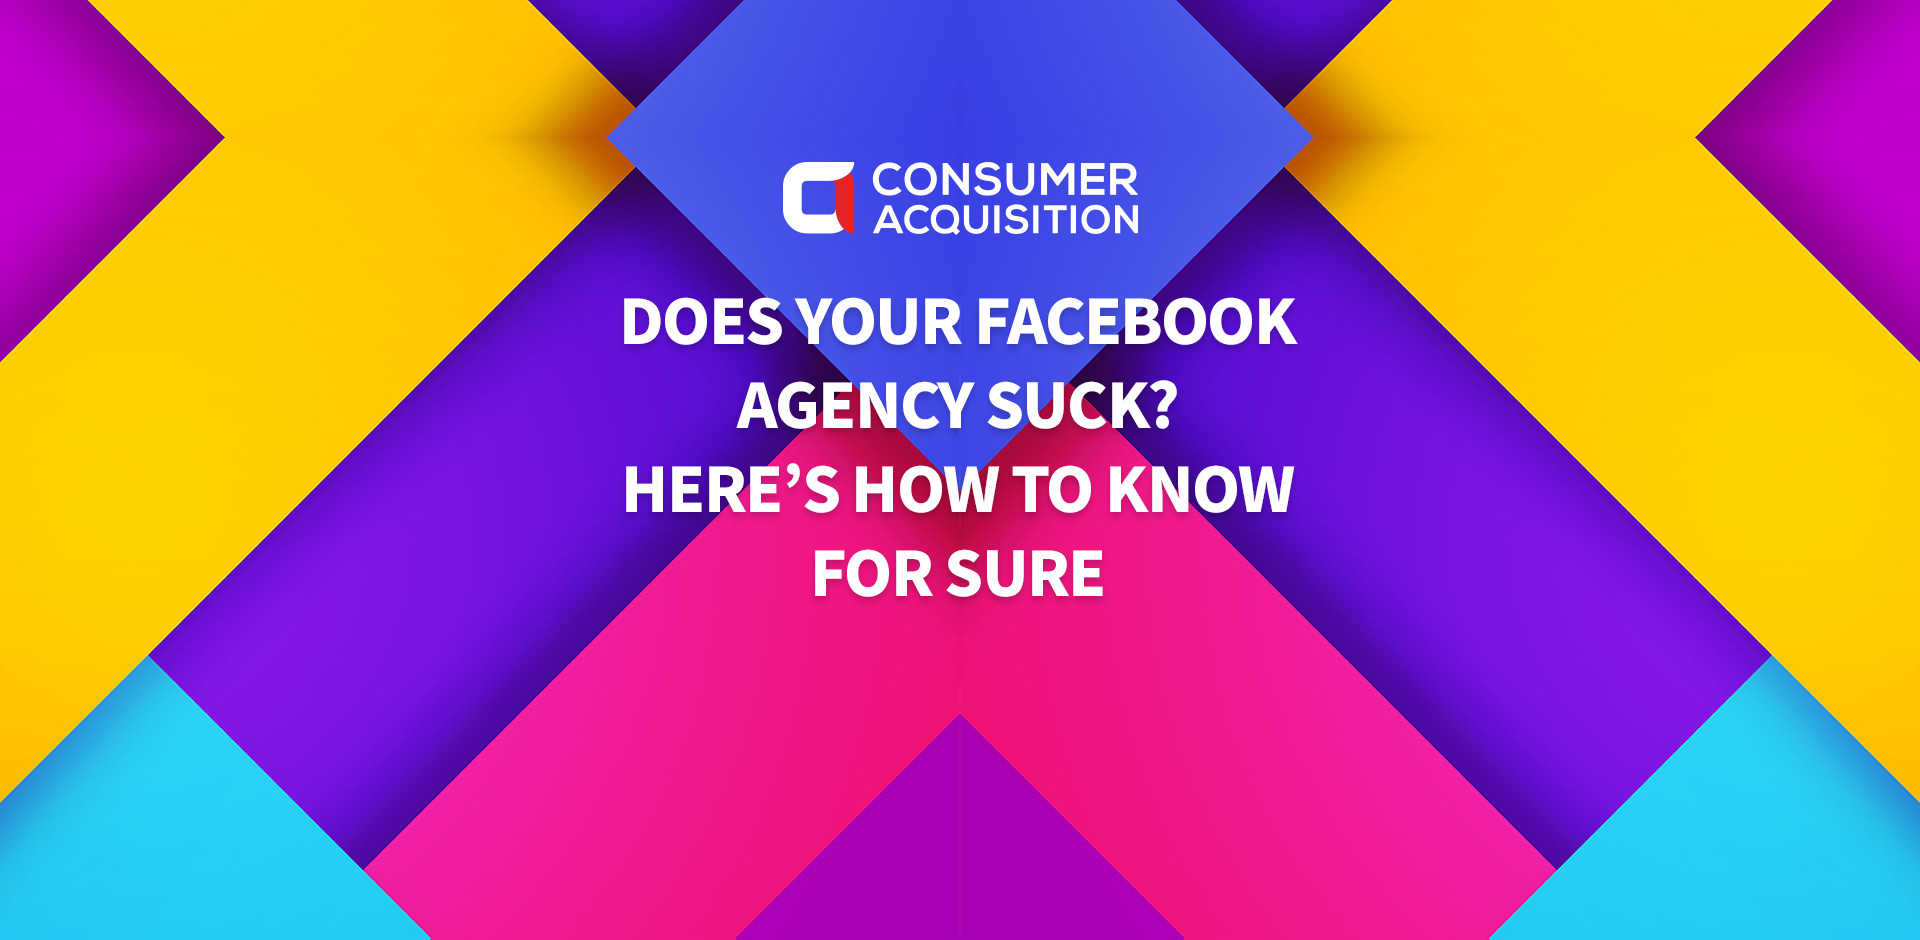 Does Your Facebook Agency Suck? Here’s How To Know for Sure.